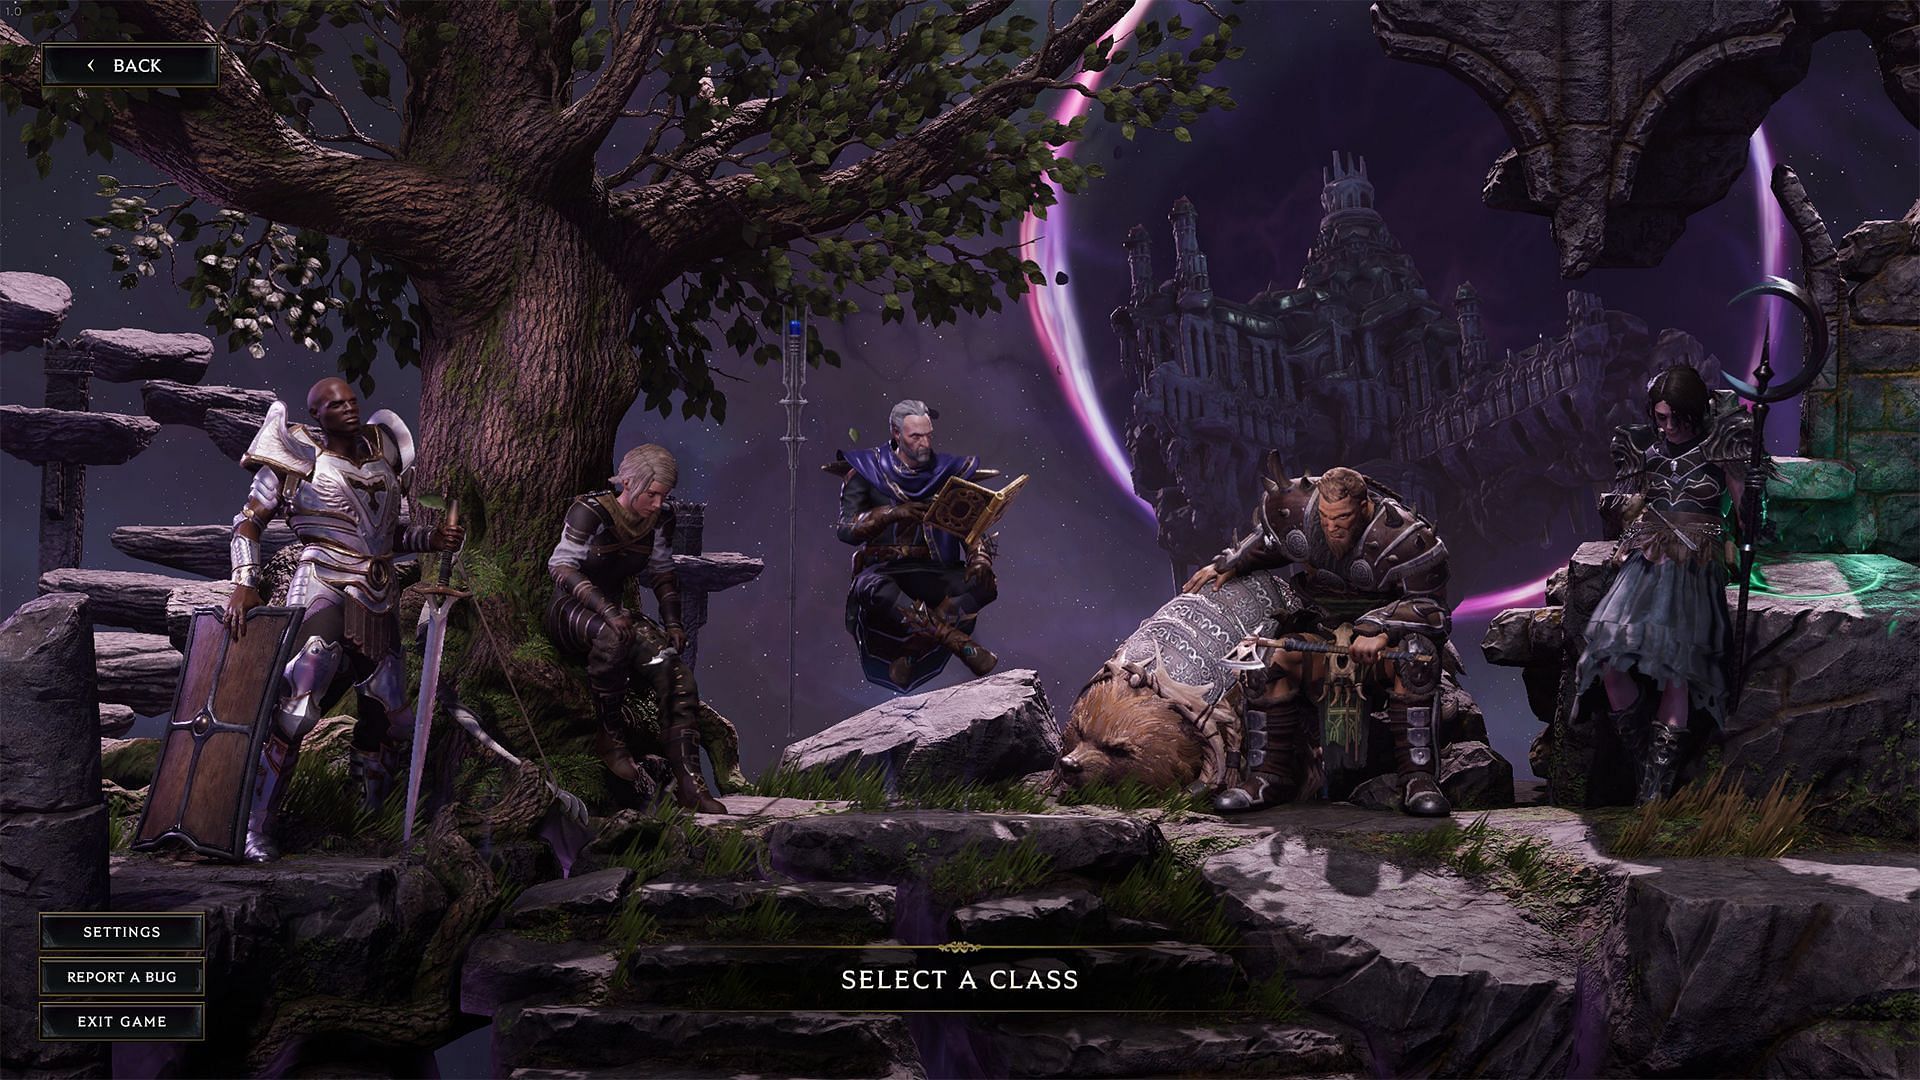 Base classes in Last Epoch (Image via Eleventh Hour Games)